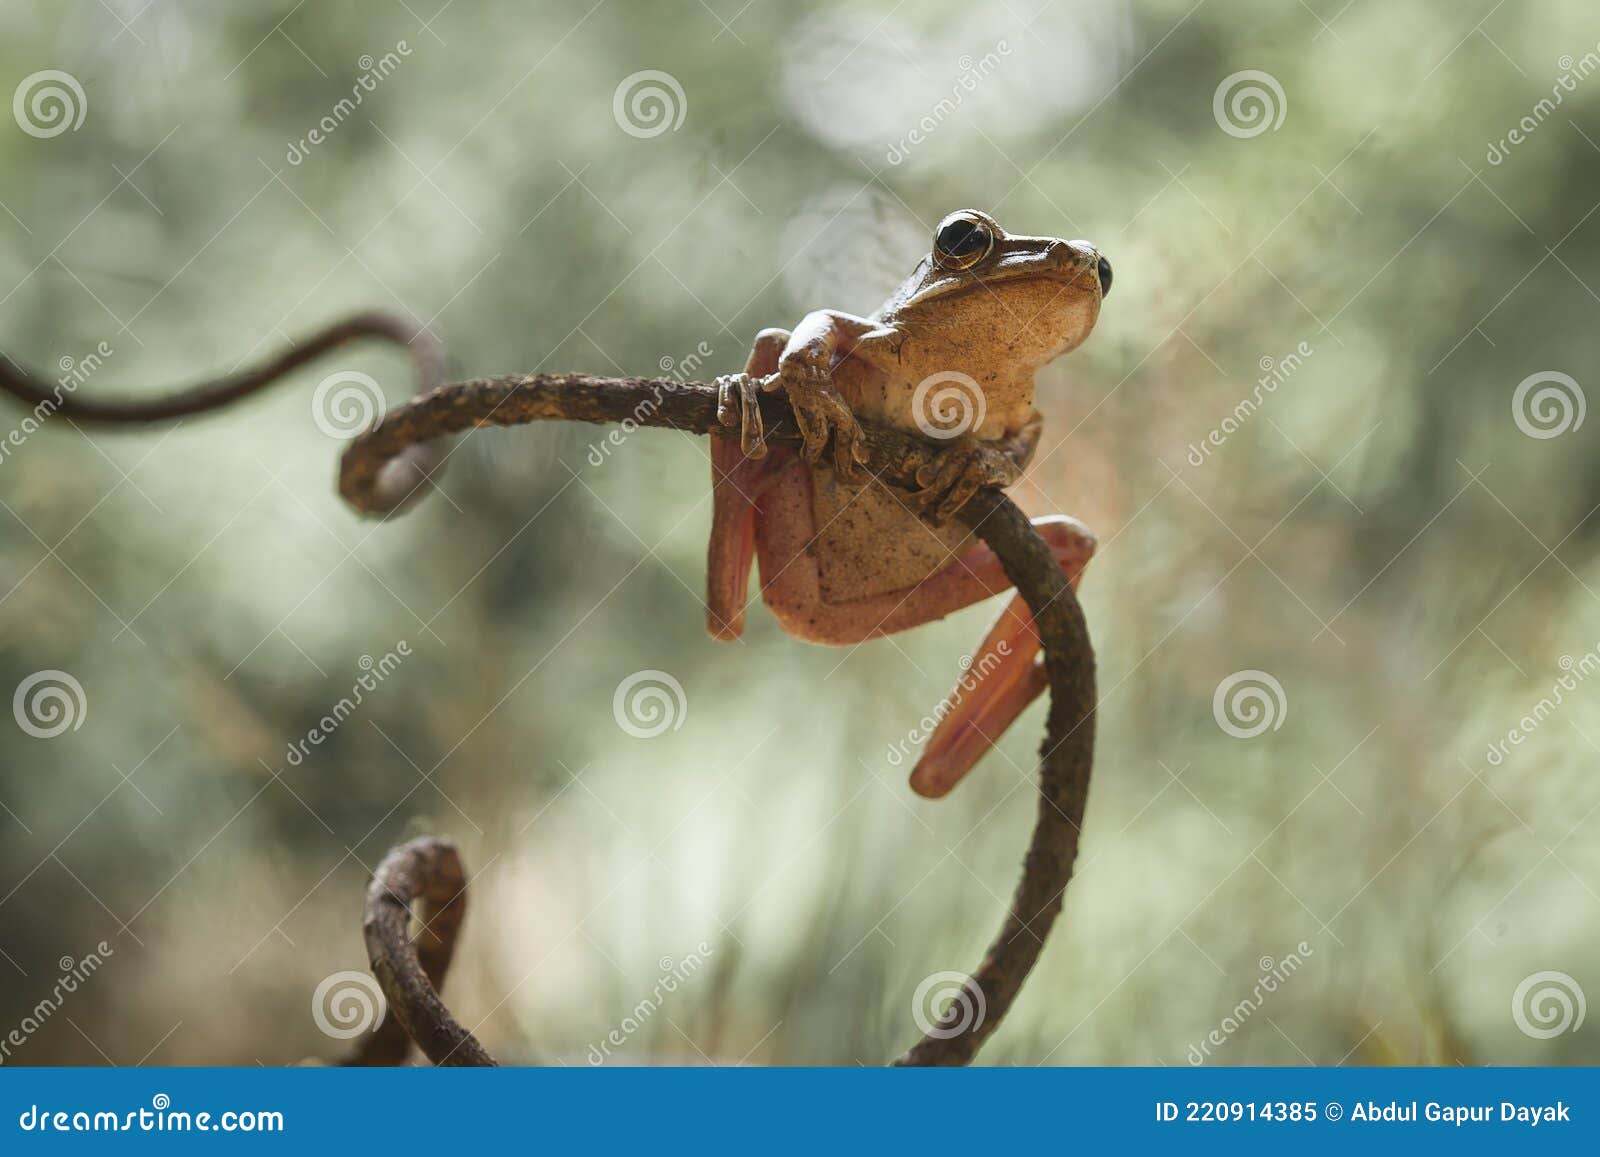 Frog or Toad in Amazing Pose Stock Image - Image of insects, animals:  220914385